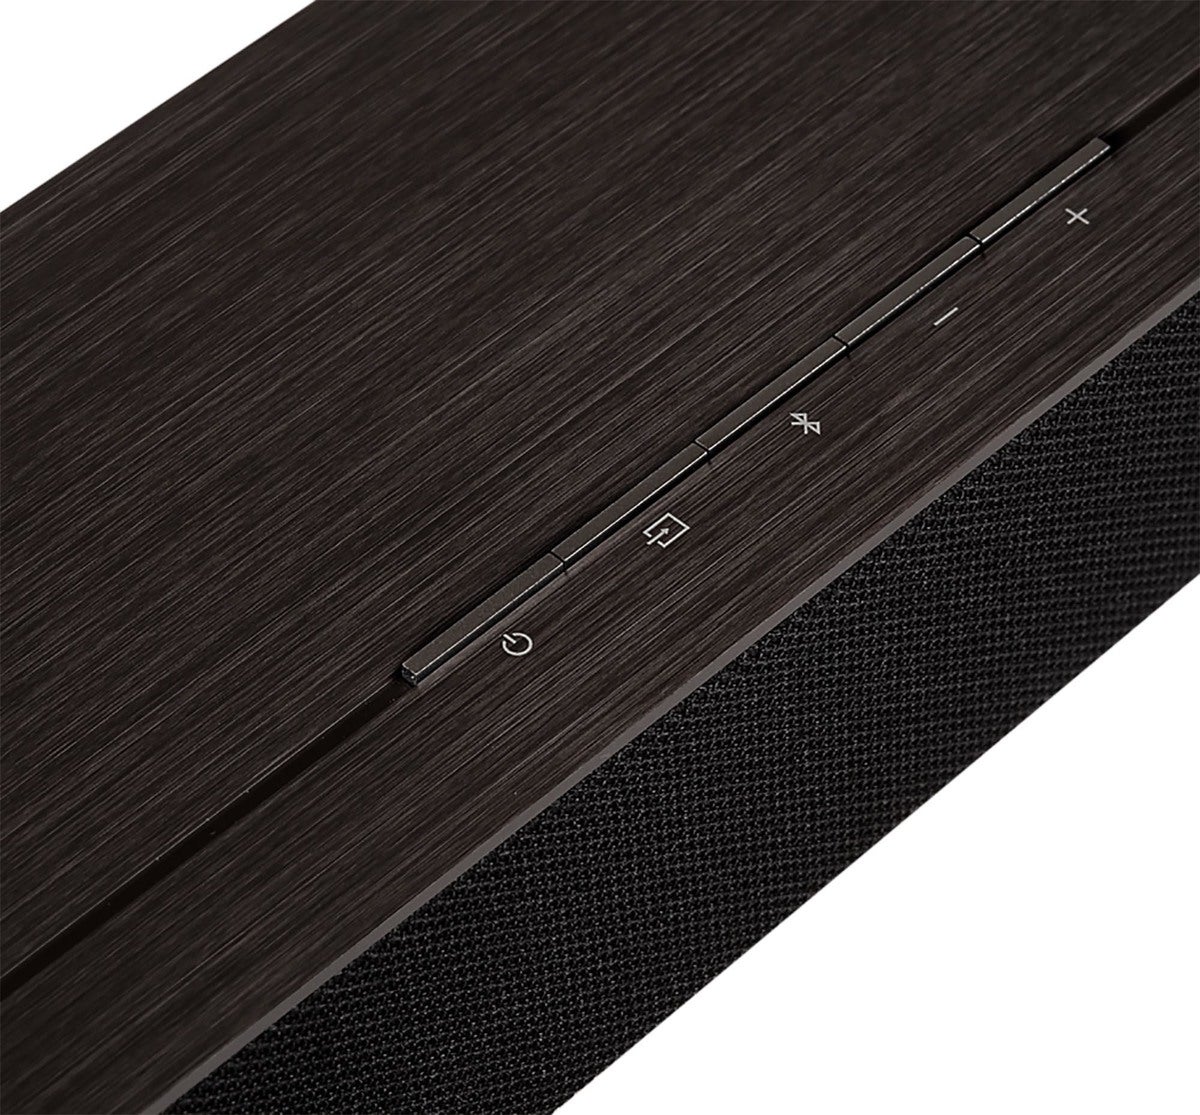 The beautiful charcoal-grey, brushed aluminum top panel features buttons with commonly needed tasks